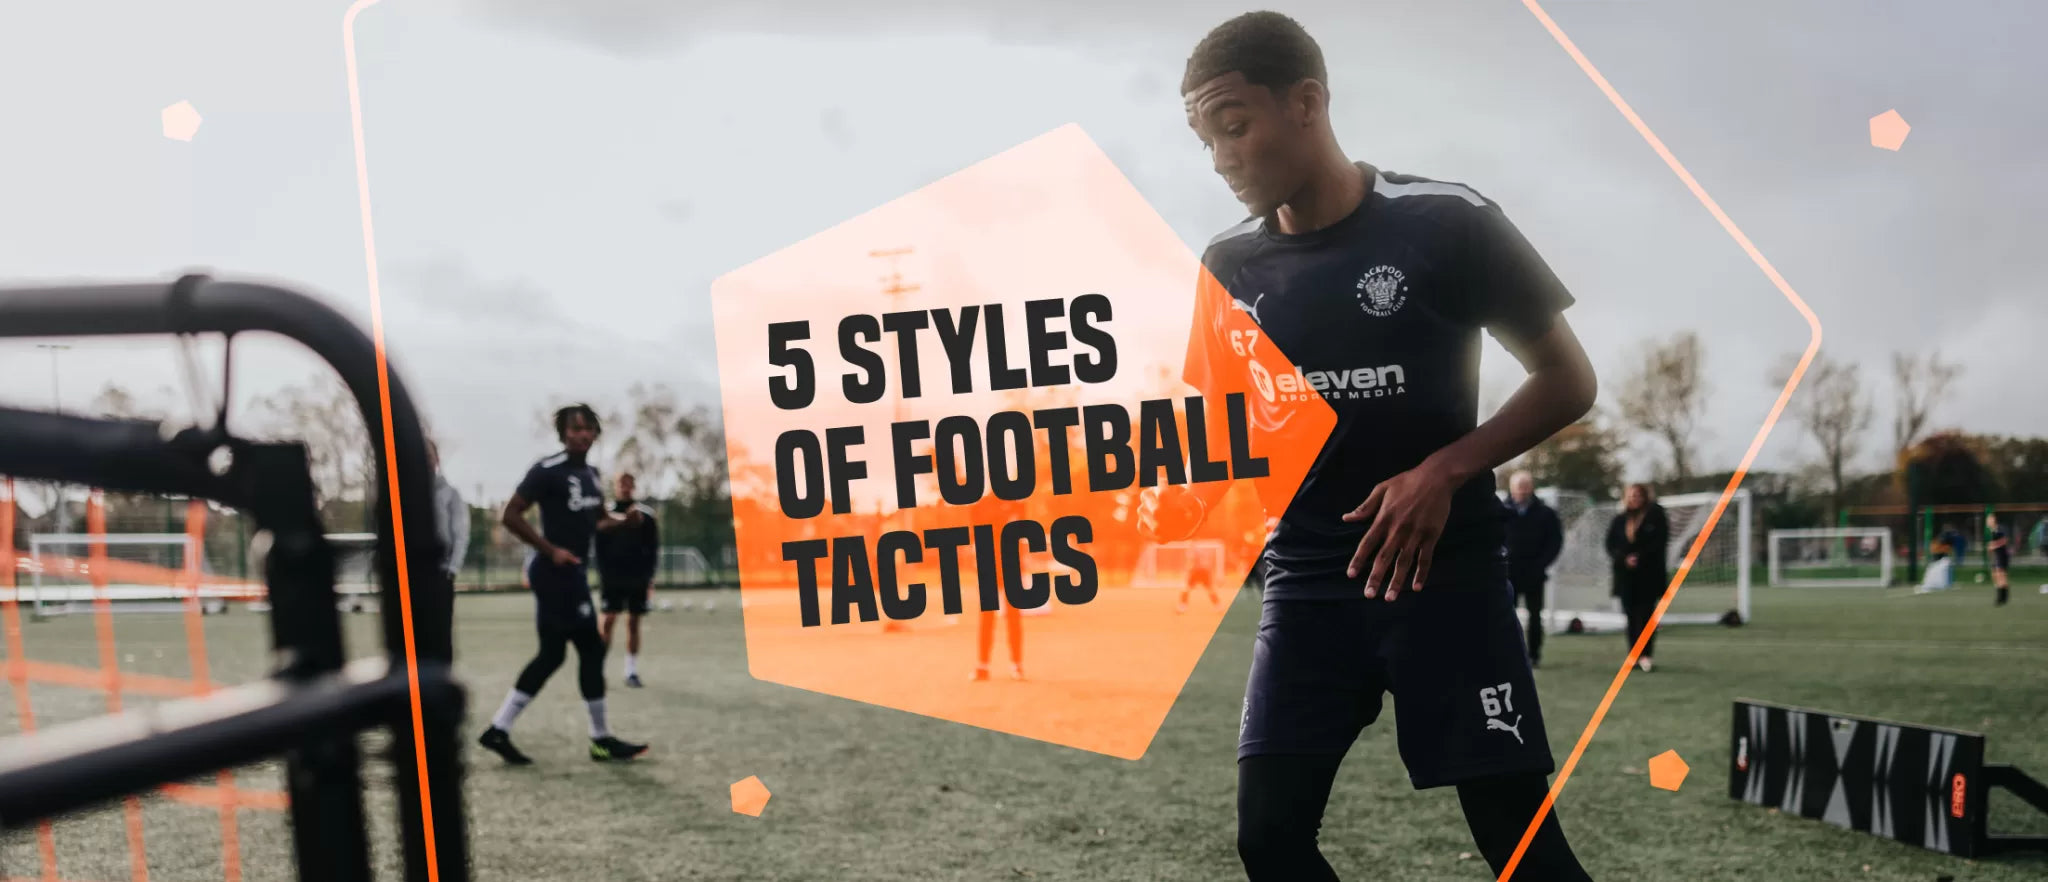 5 Common Football Tactics You Should Know.